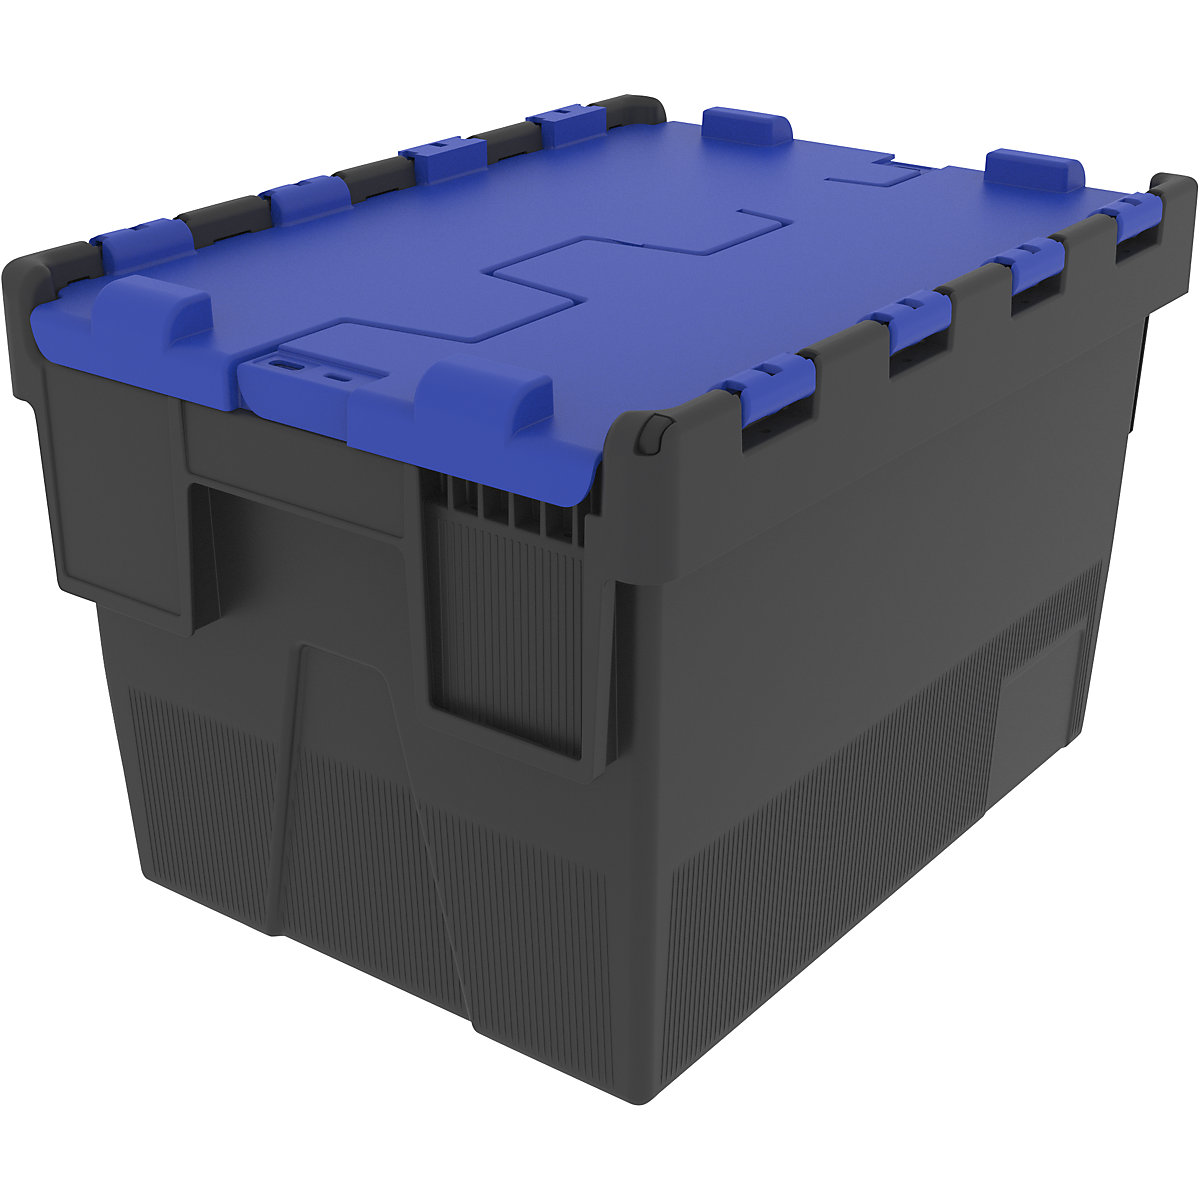 Reusable stacking container, LxWxH 400 x 300 x 264 mm, black/blue-3